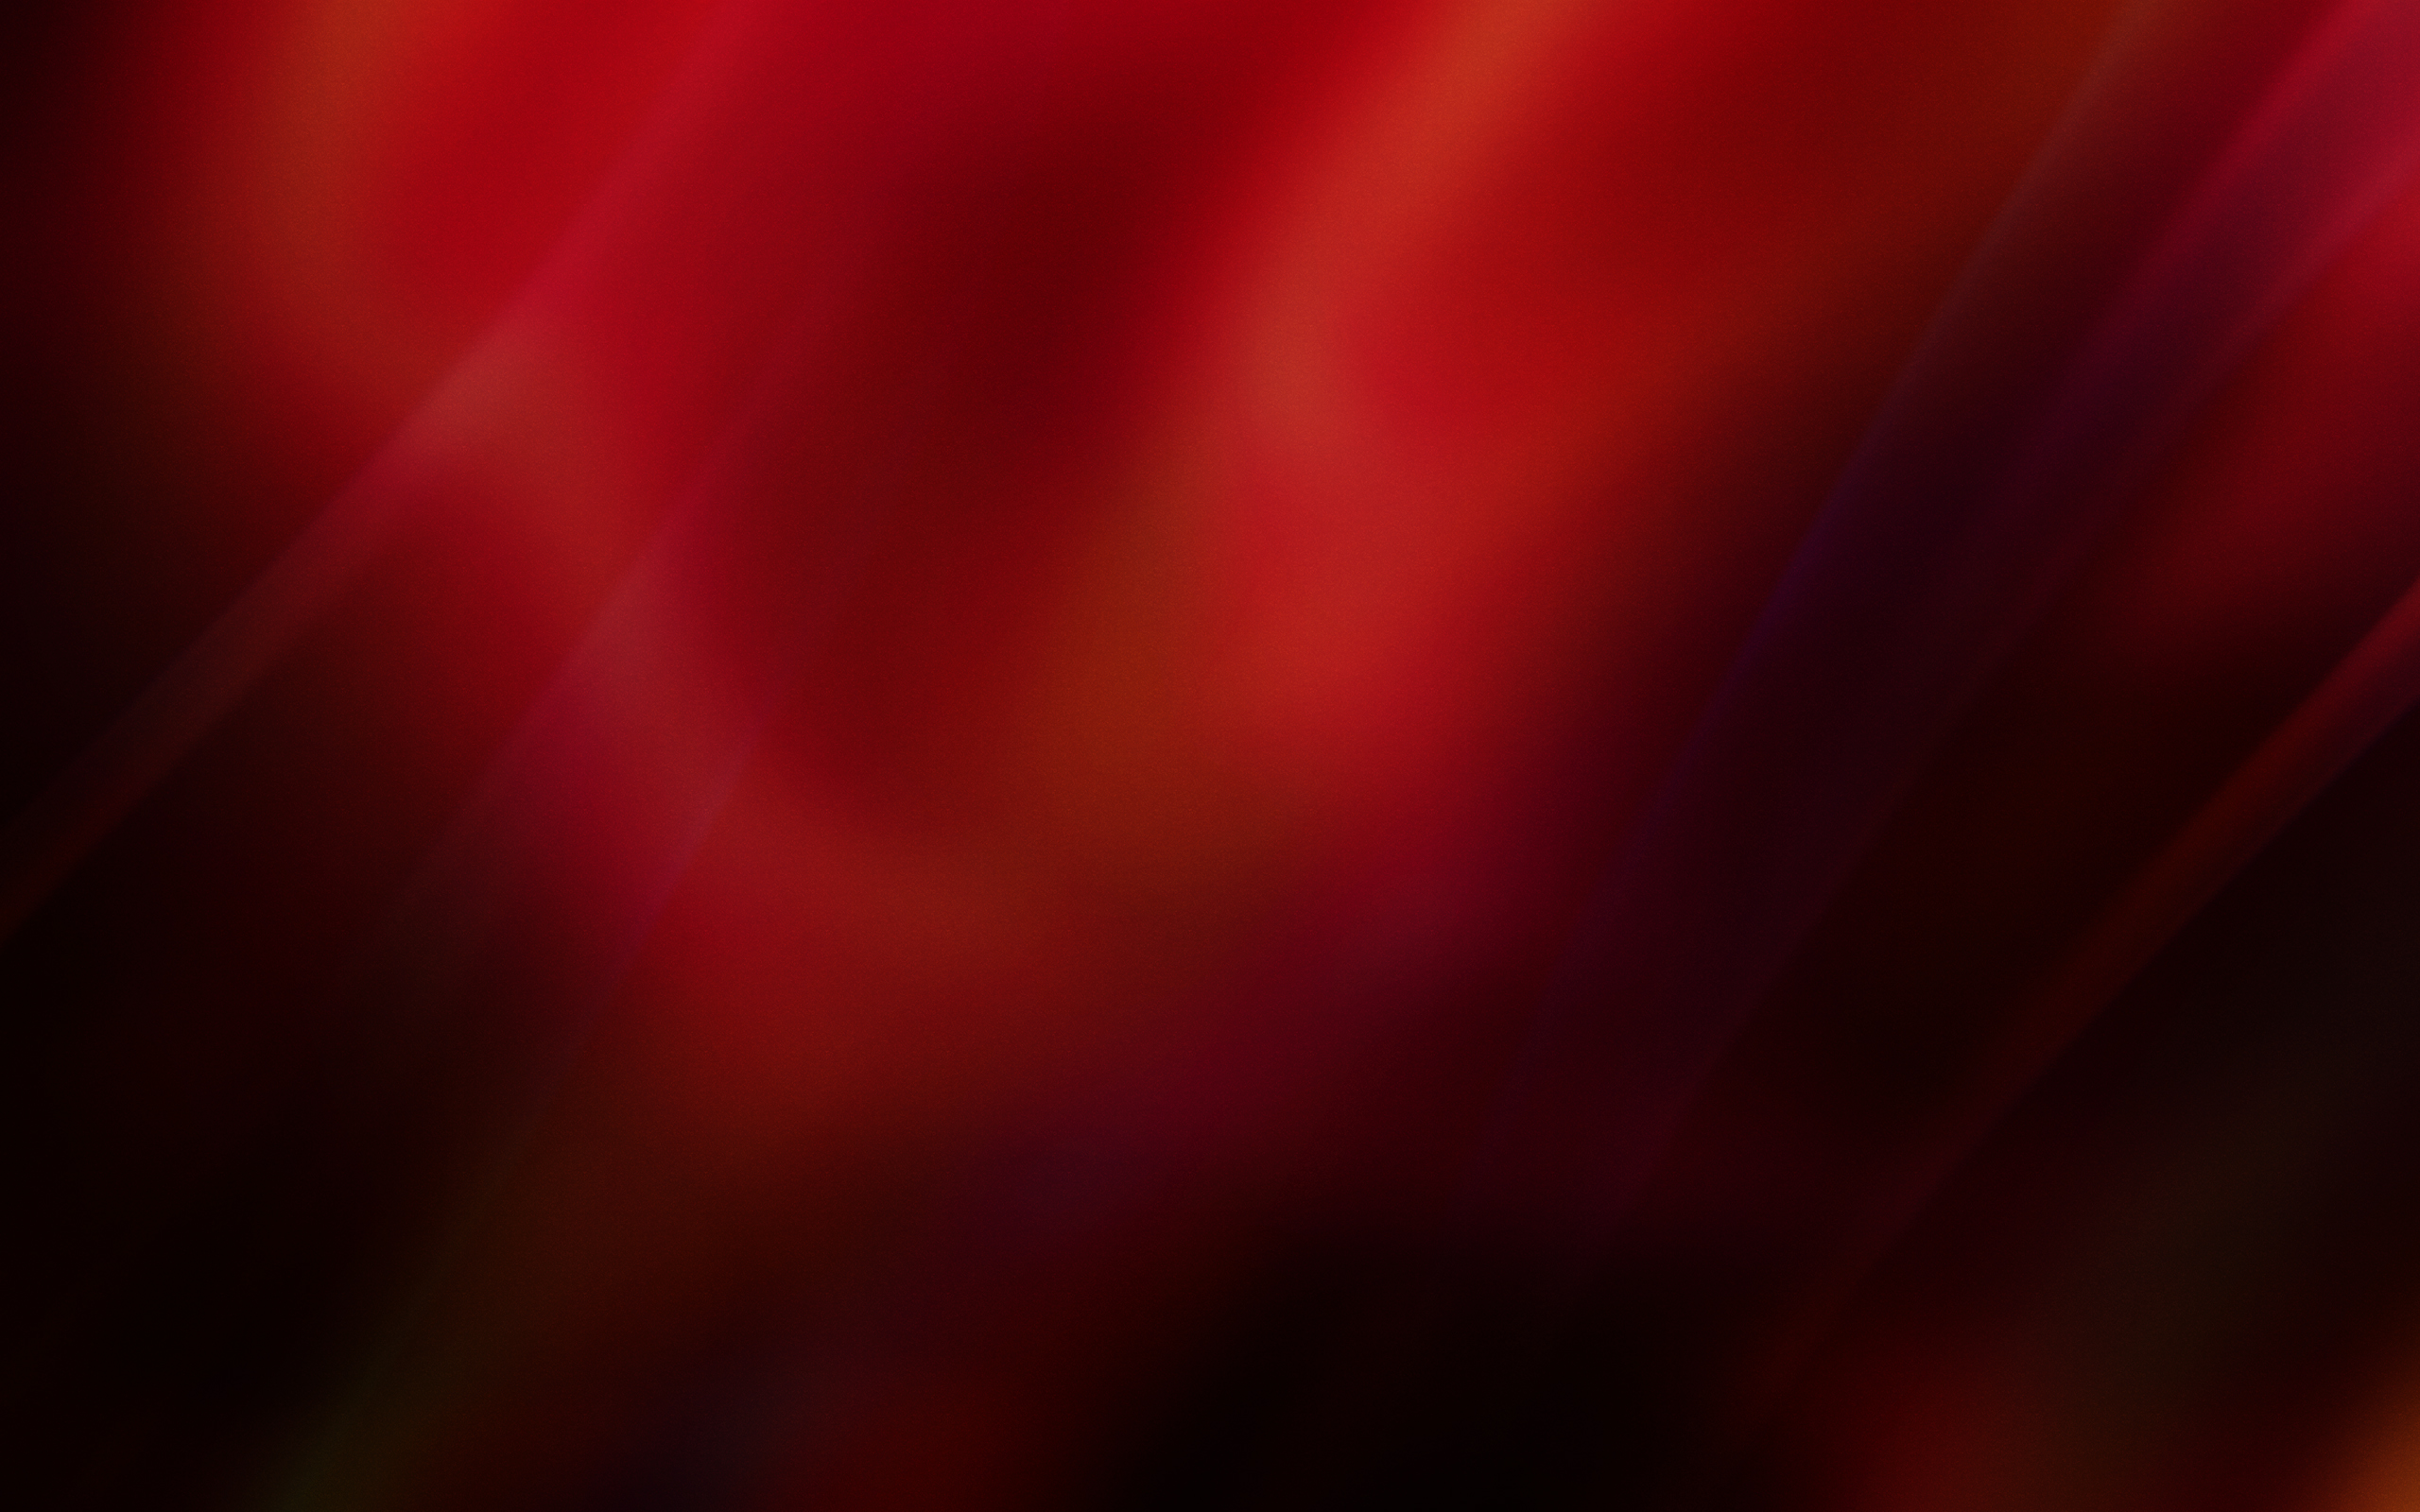 Red And Black Hd Wallpapers For Mac #2878 | Cool Wallpapers